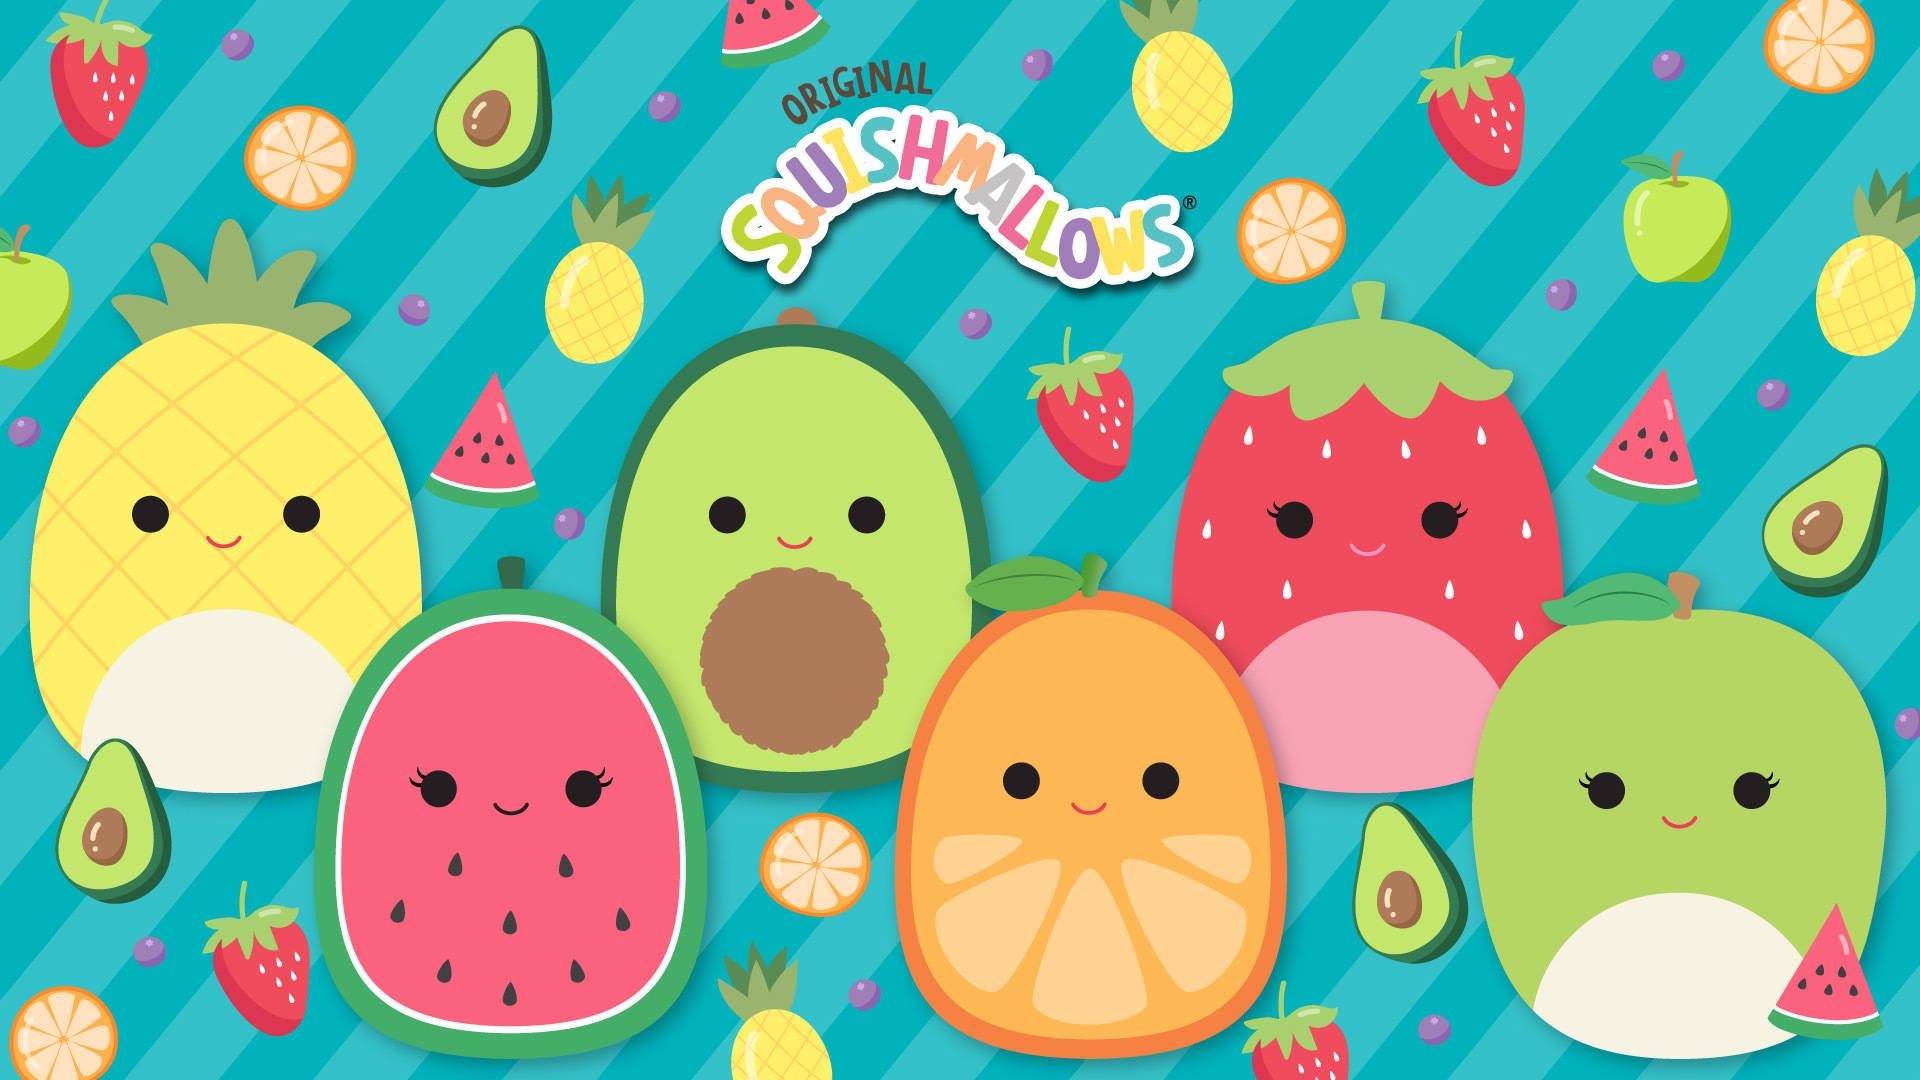 Squishmallows 1920X1080 Wallpaper and Background Image